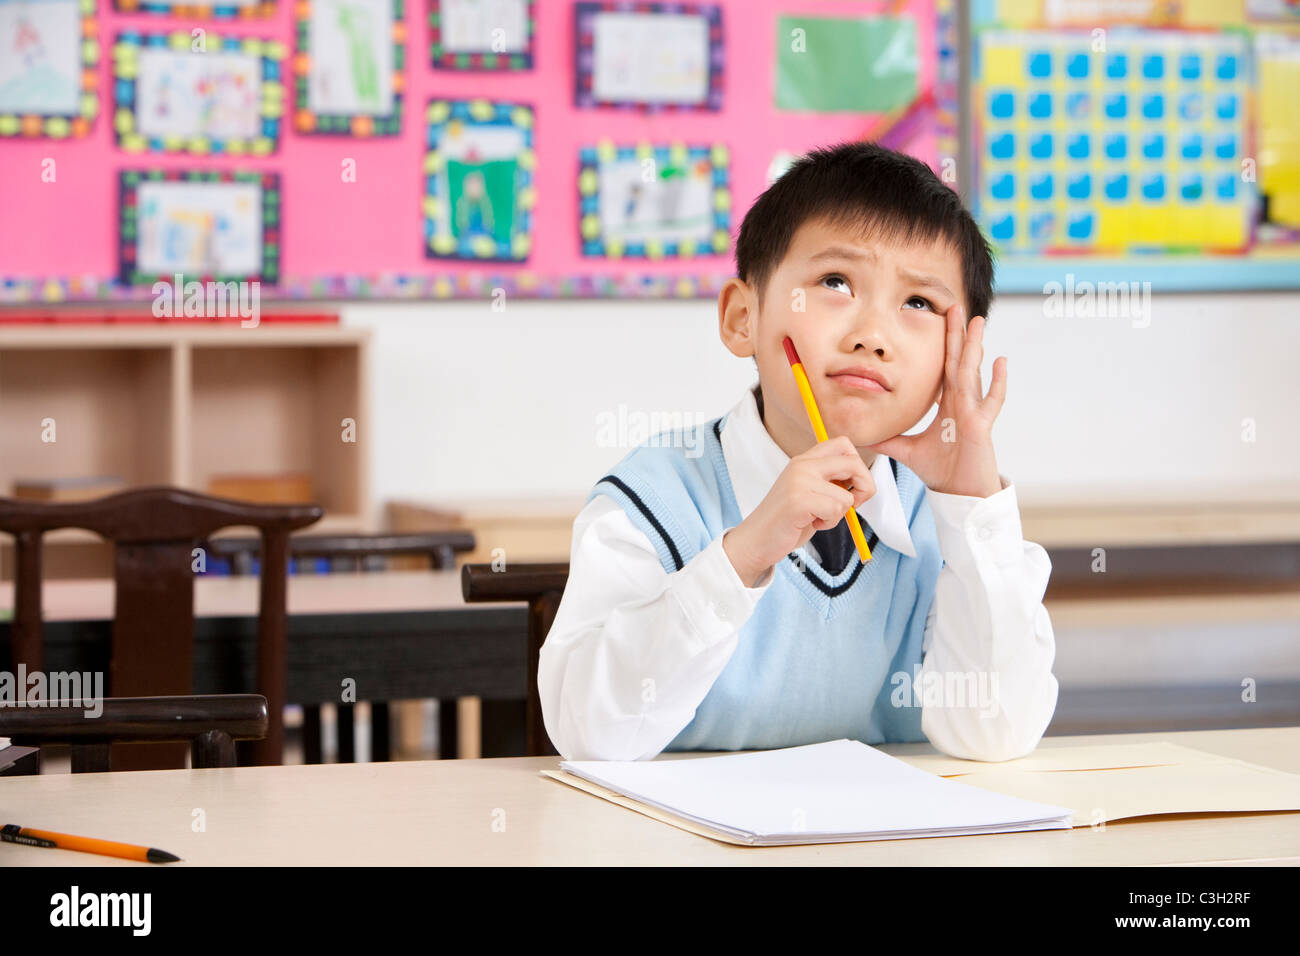 Young student writing in classroom Stock Photo